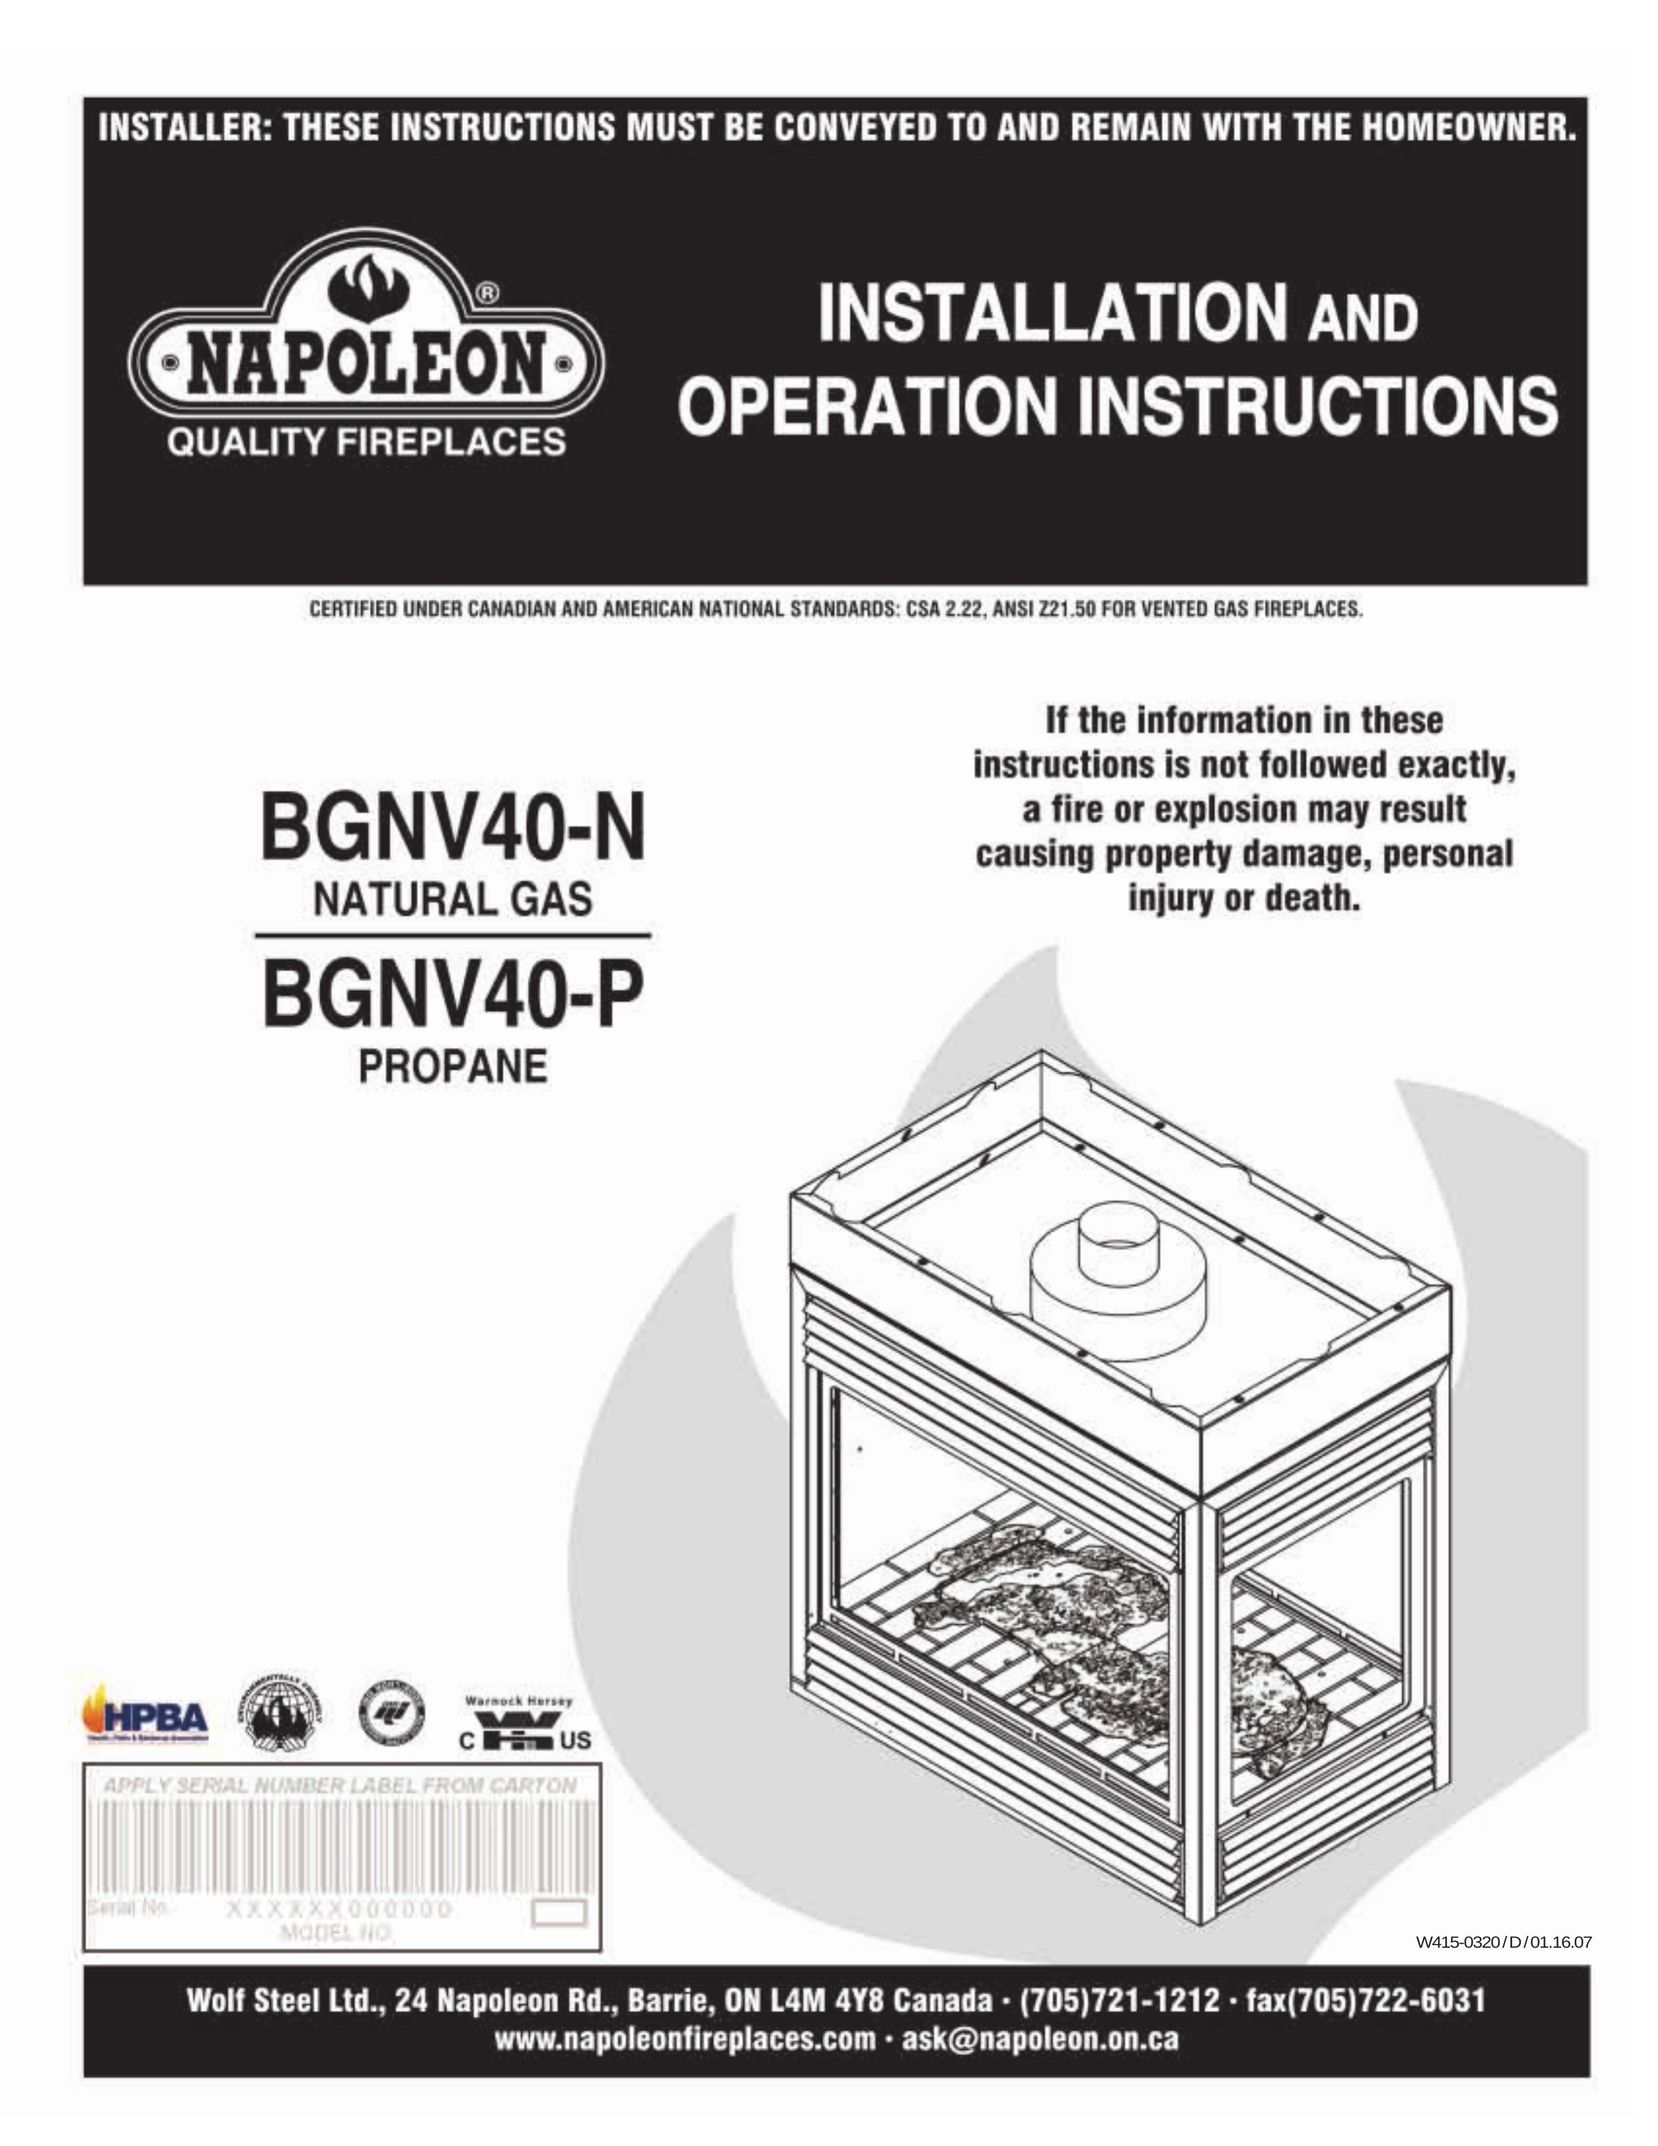 Napoleon Fireplaces BGNV40-P Indoor Fireplace User Manual